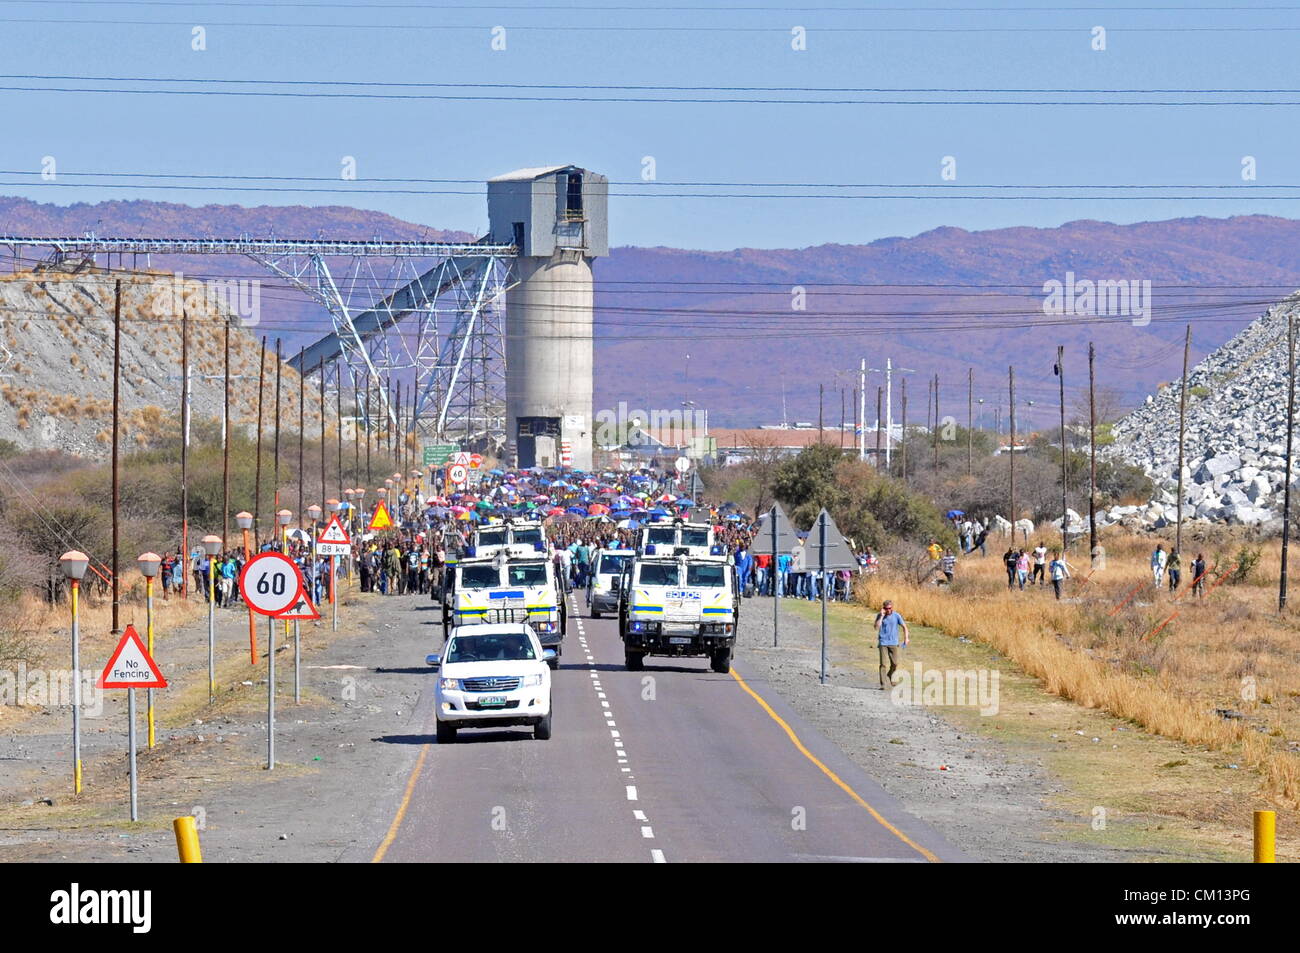 RUSTENBURG, SOUTH AFRICA: Lonmin mine workers march to three different mines demanding that shafts be closed down and workers join them in their wage strike on September 10, 2012 in Rustenburg, South Africa. The workers have been protesting for over three weeks. (Photo by Gallo Images / Dino Lloyd) Stock Photo